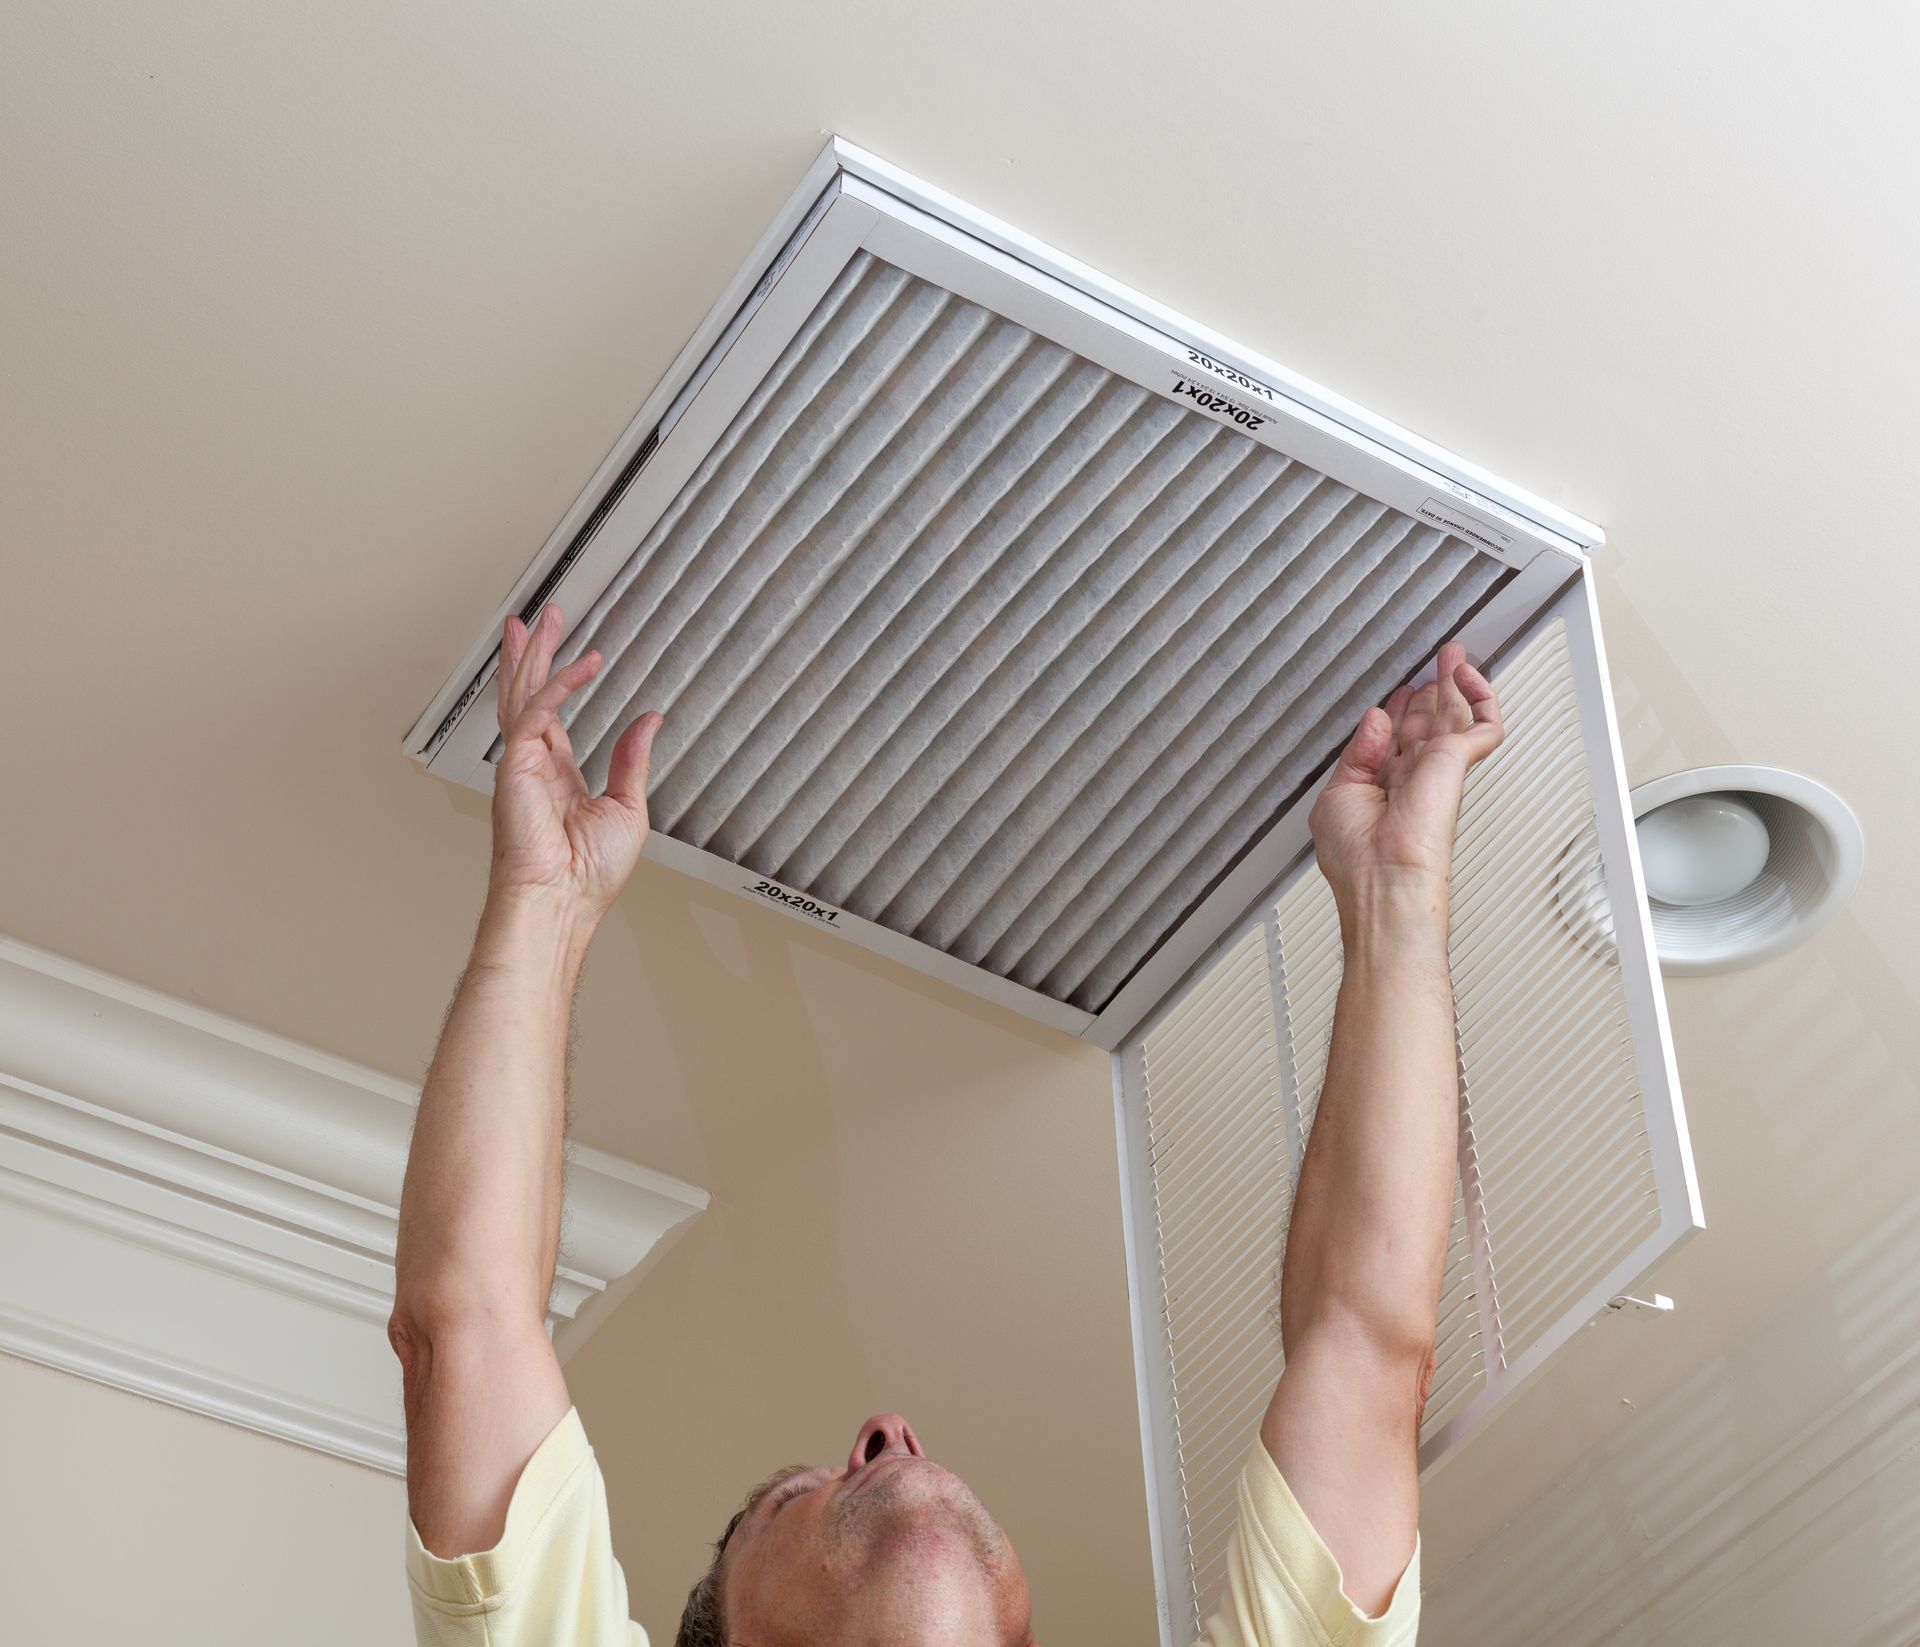 Placing Air Filter in Vent